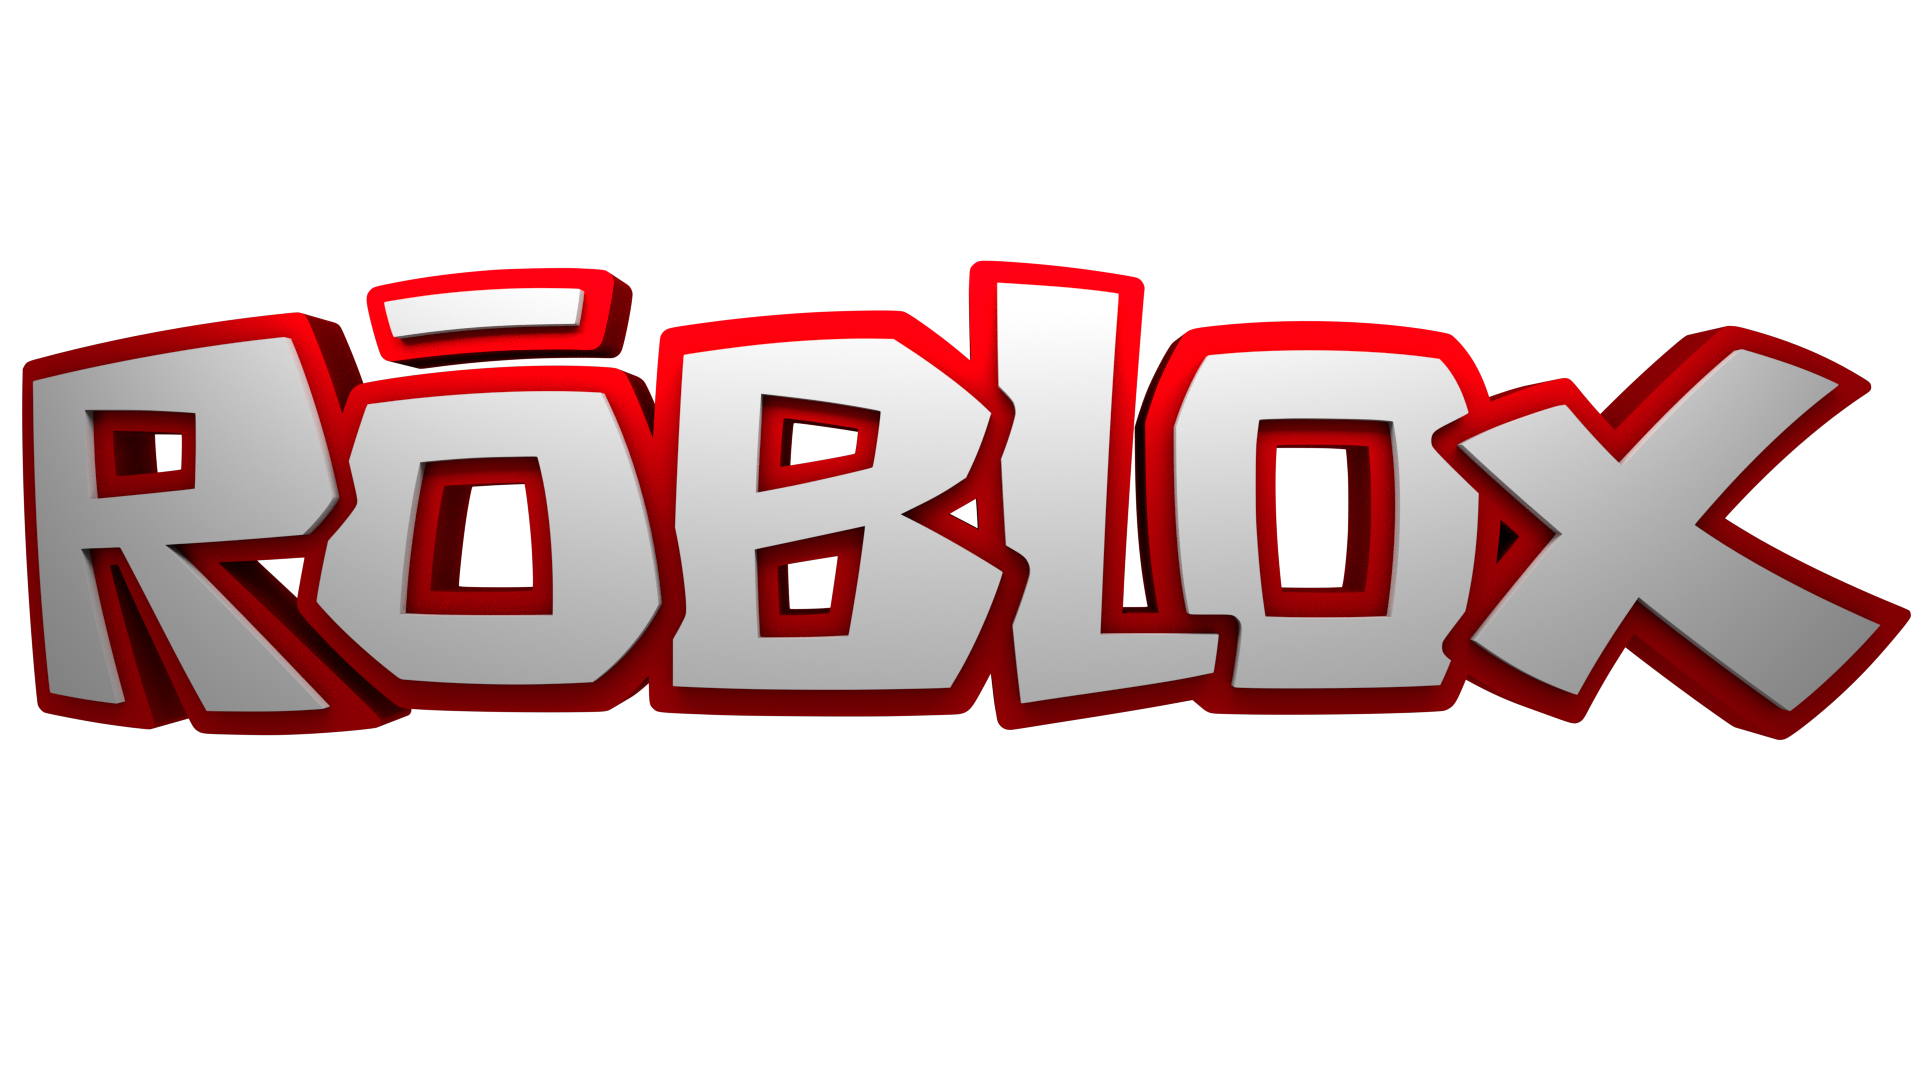 Png - Roblox